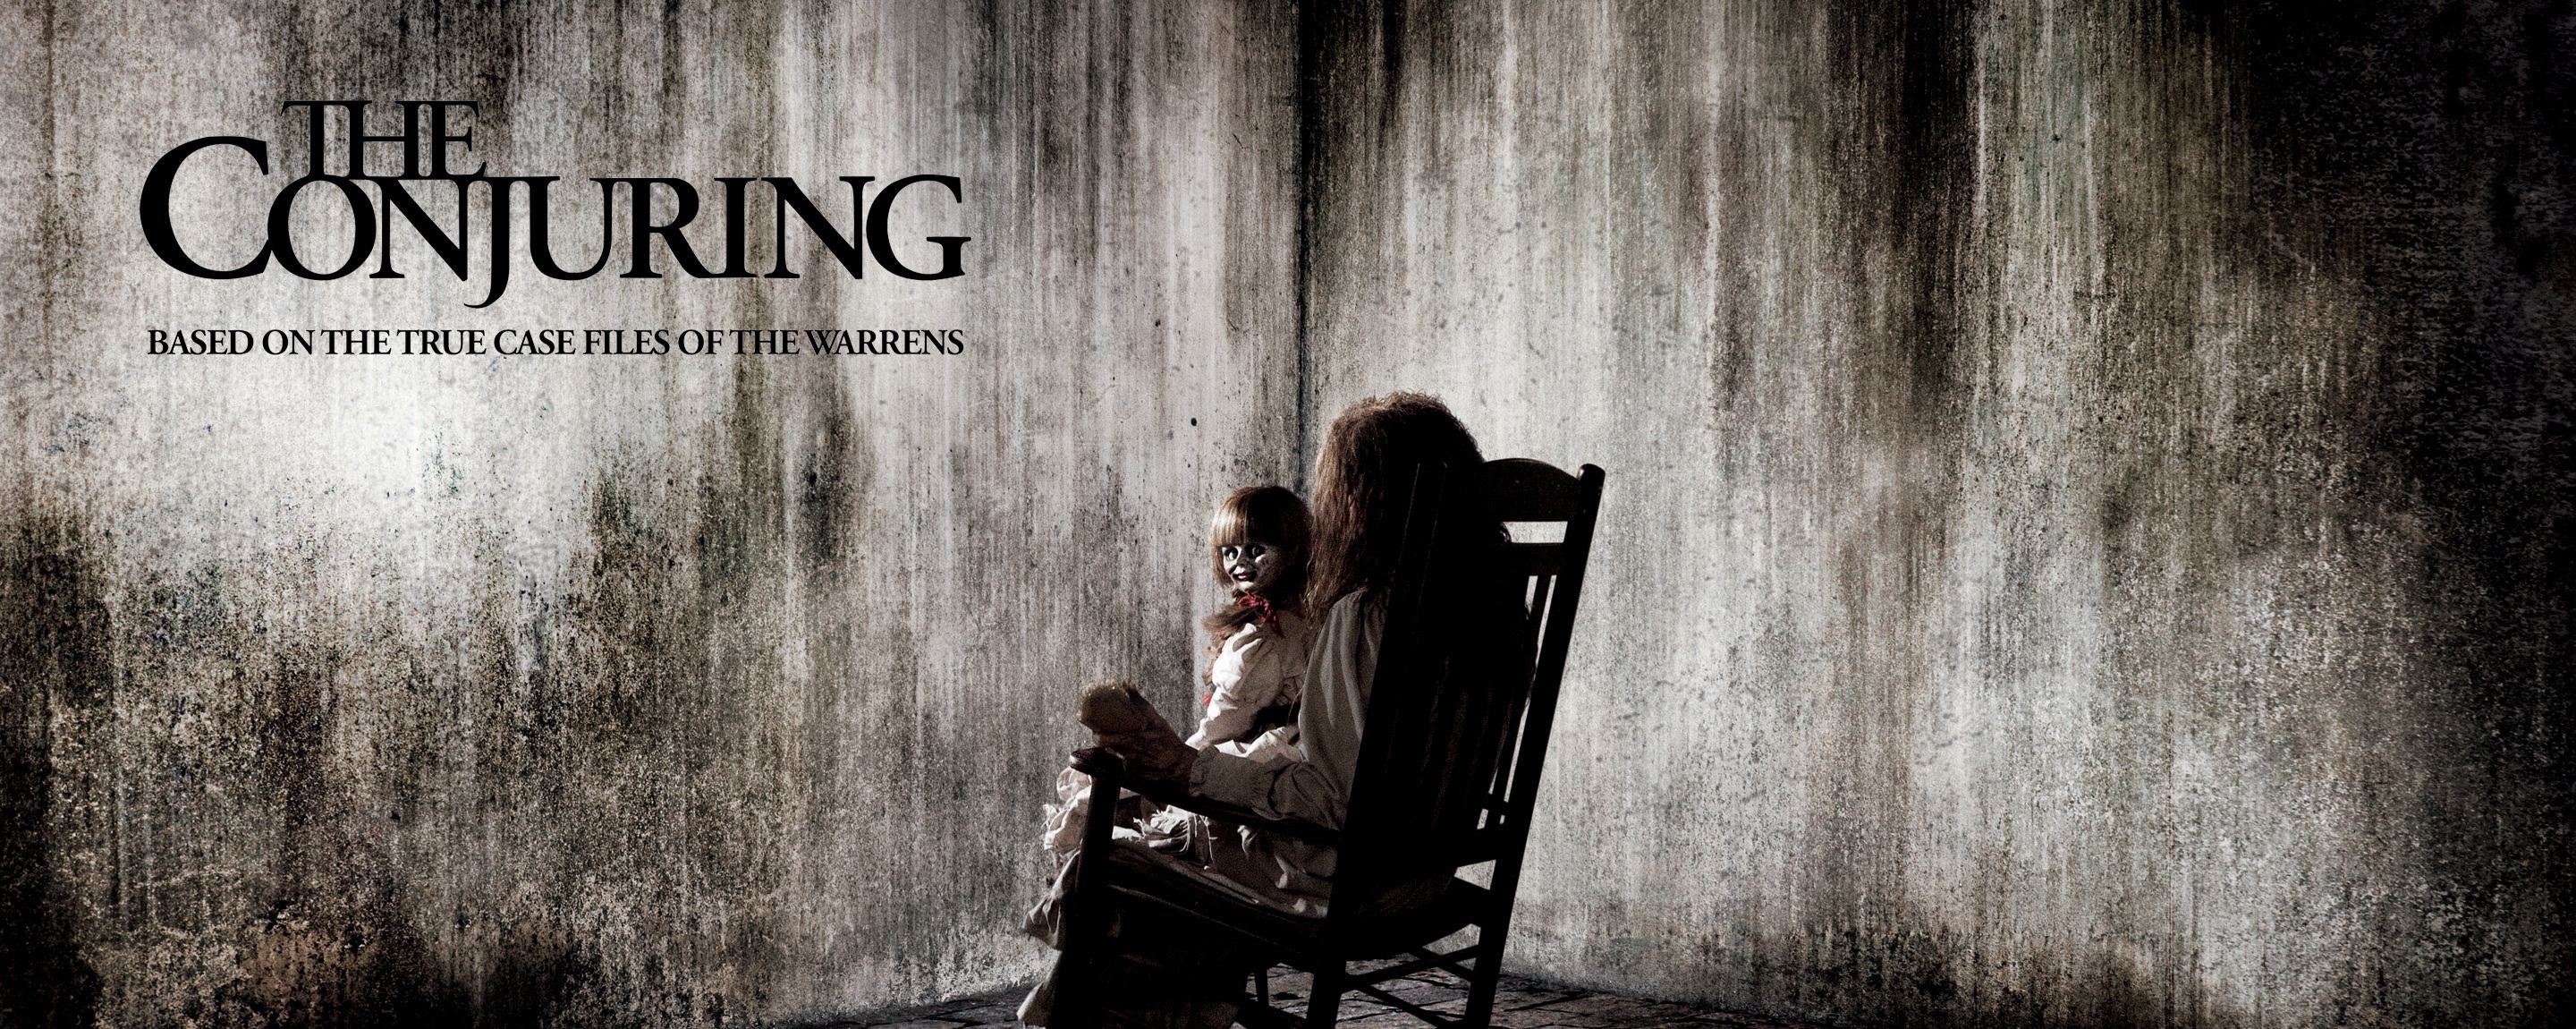 The Conjuring Blu-ray Steelbook is announced as a Zavvi exclusive